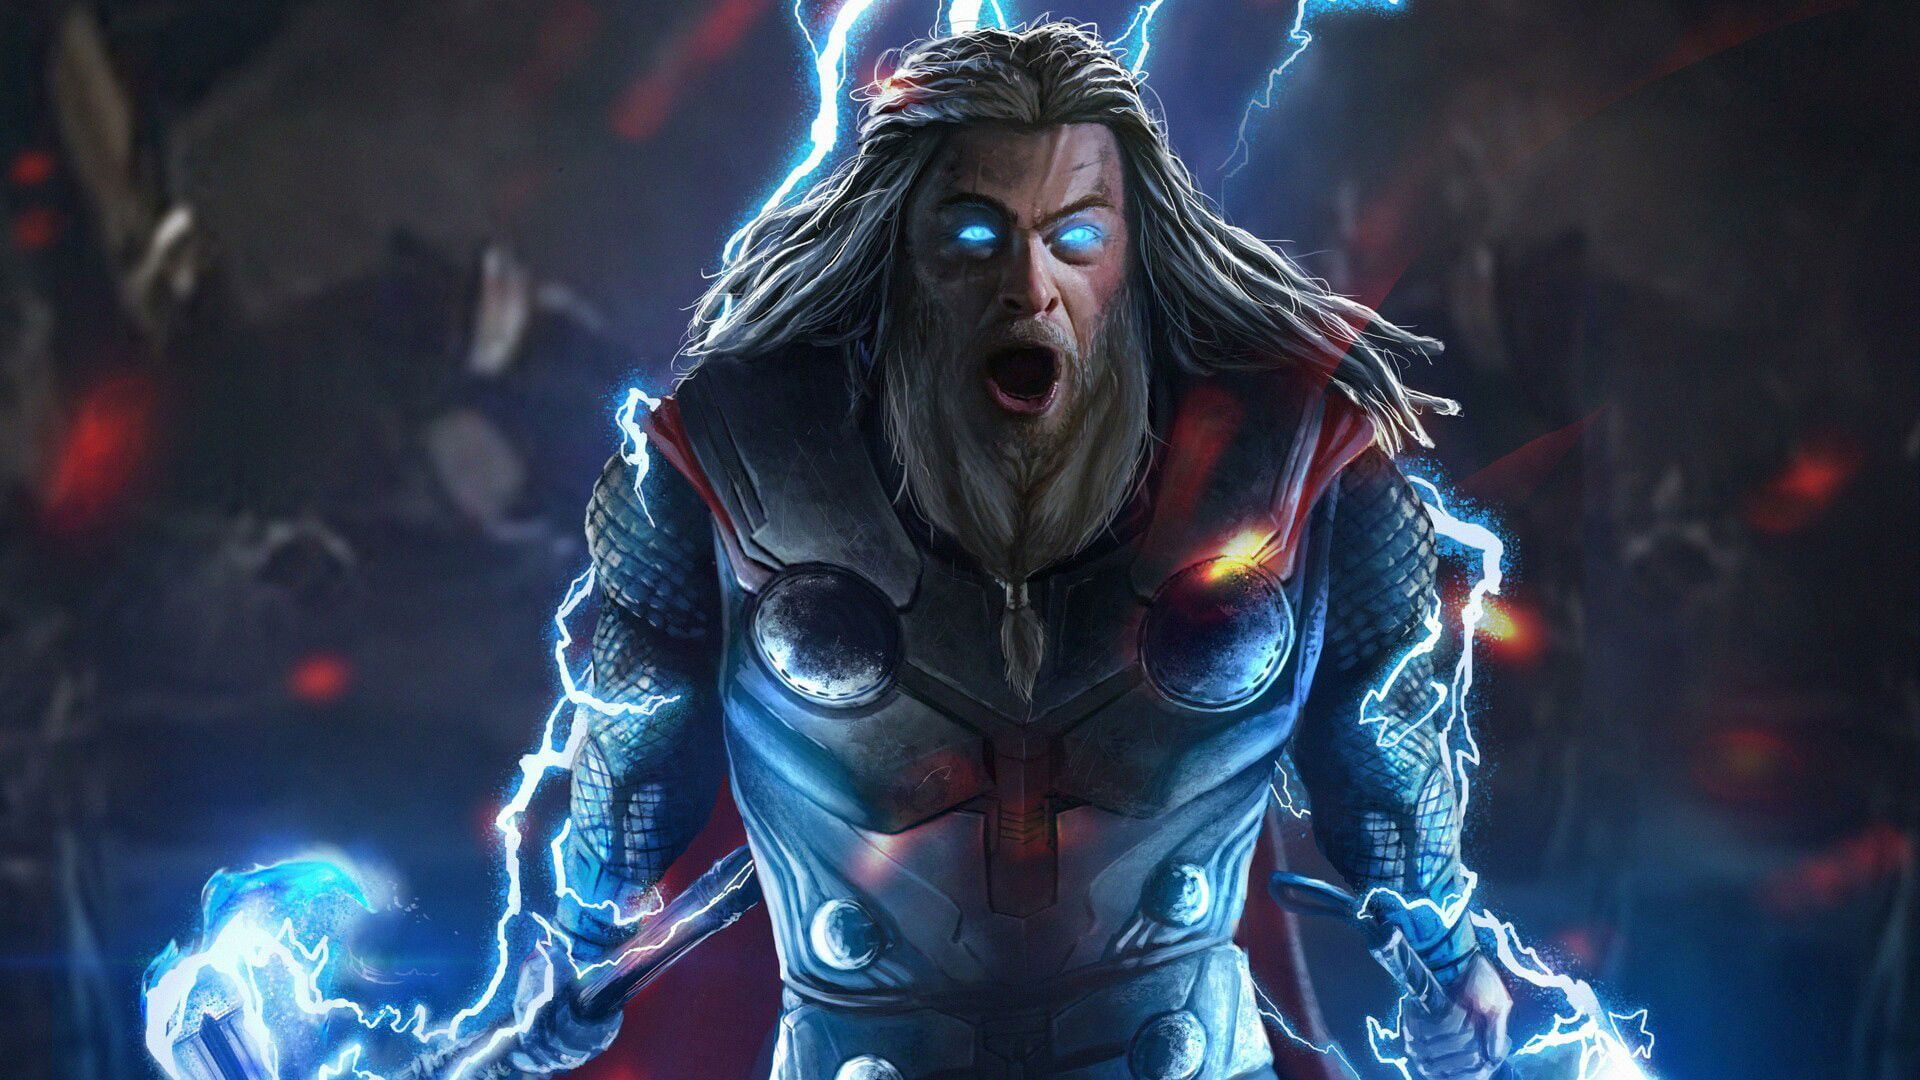 Thor is a superhero appearing in American comic books published by Marvel Comics. - Marvel